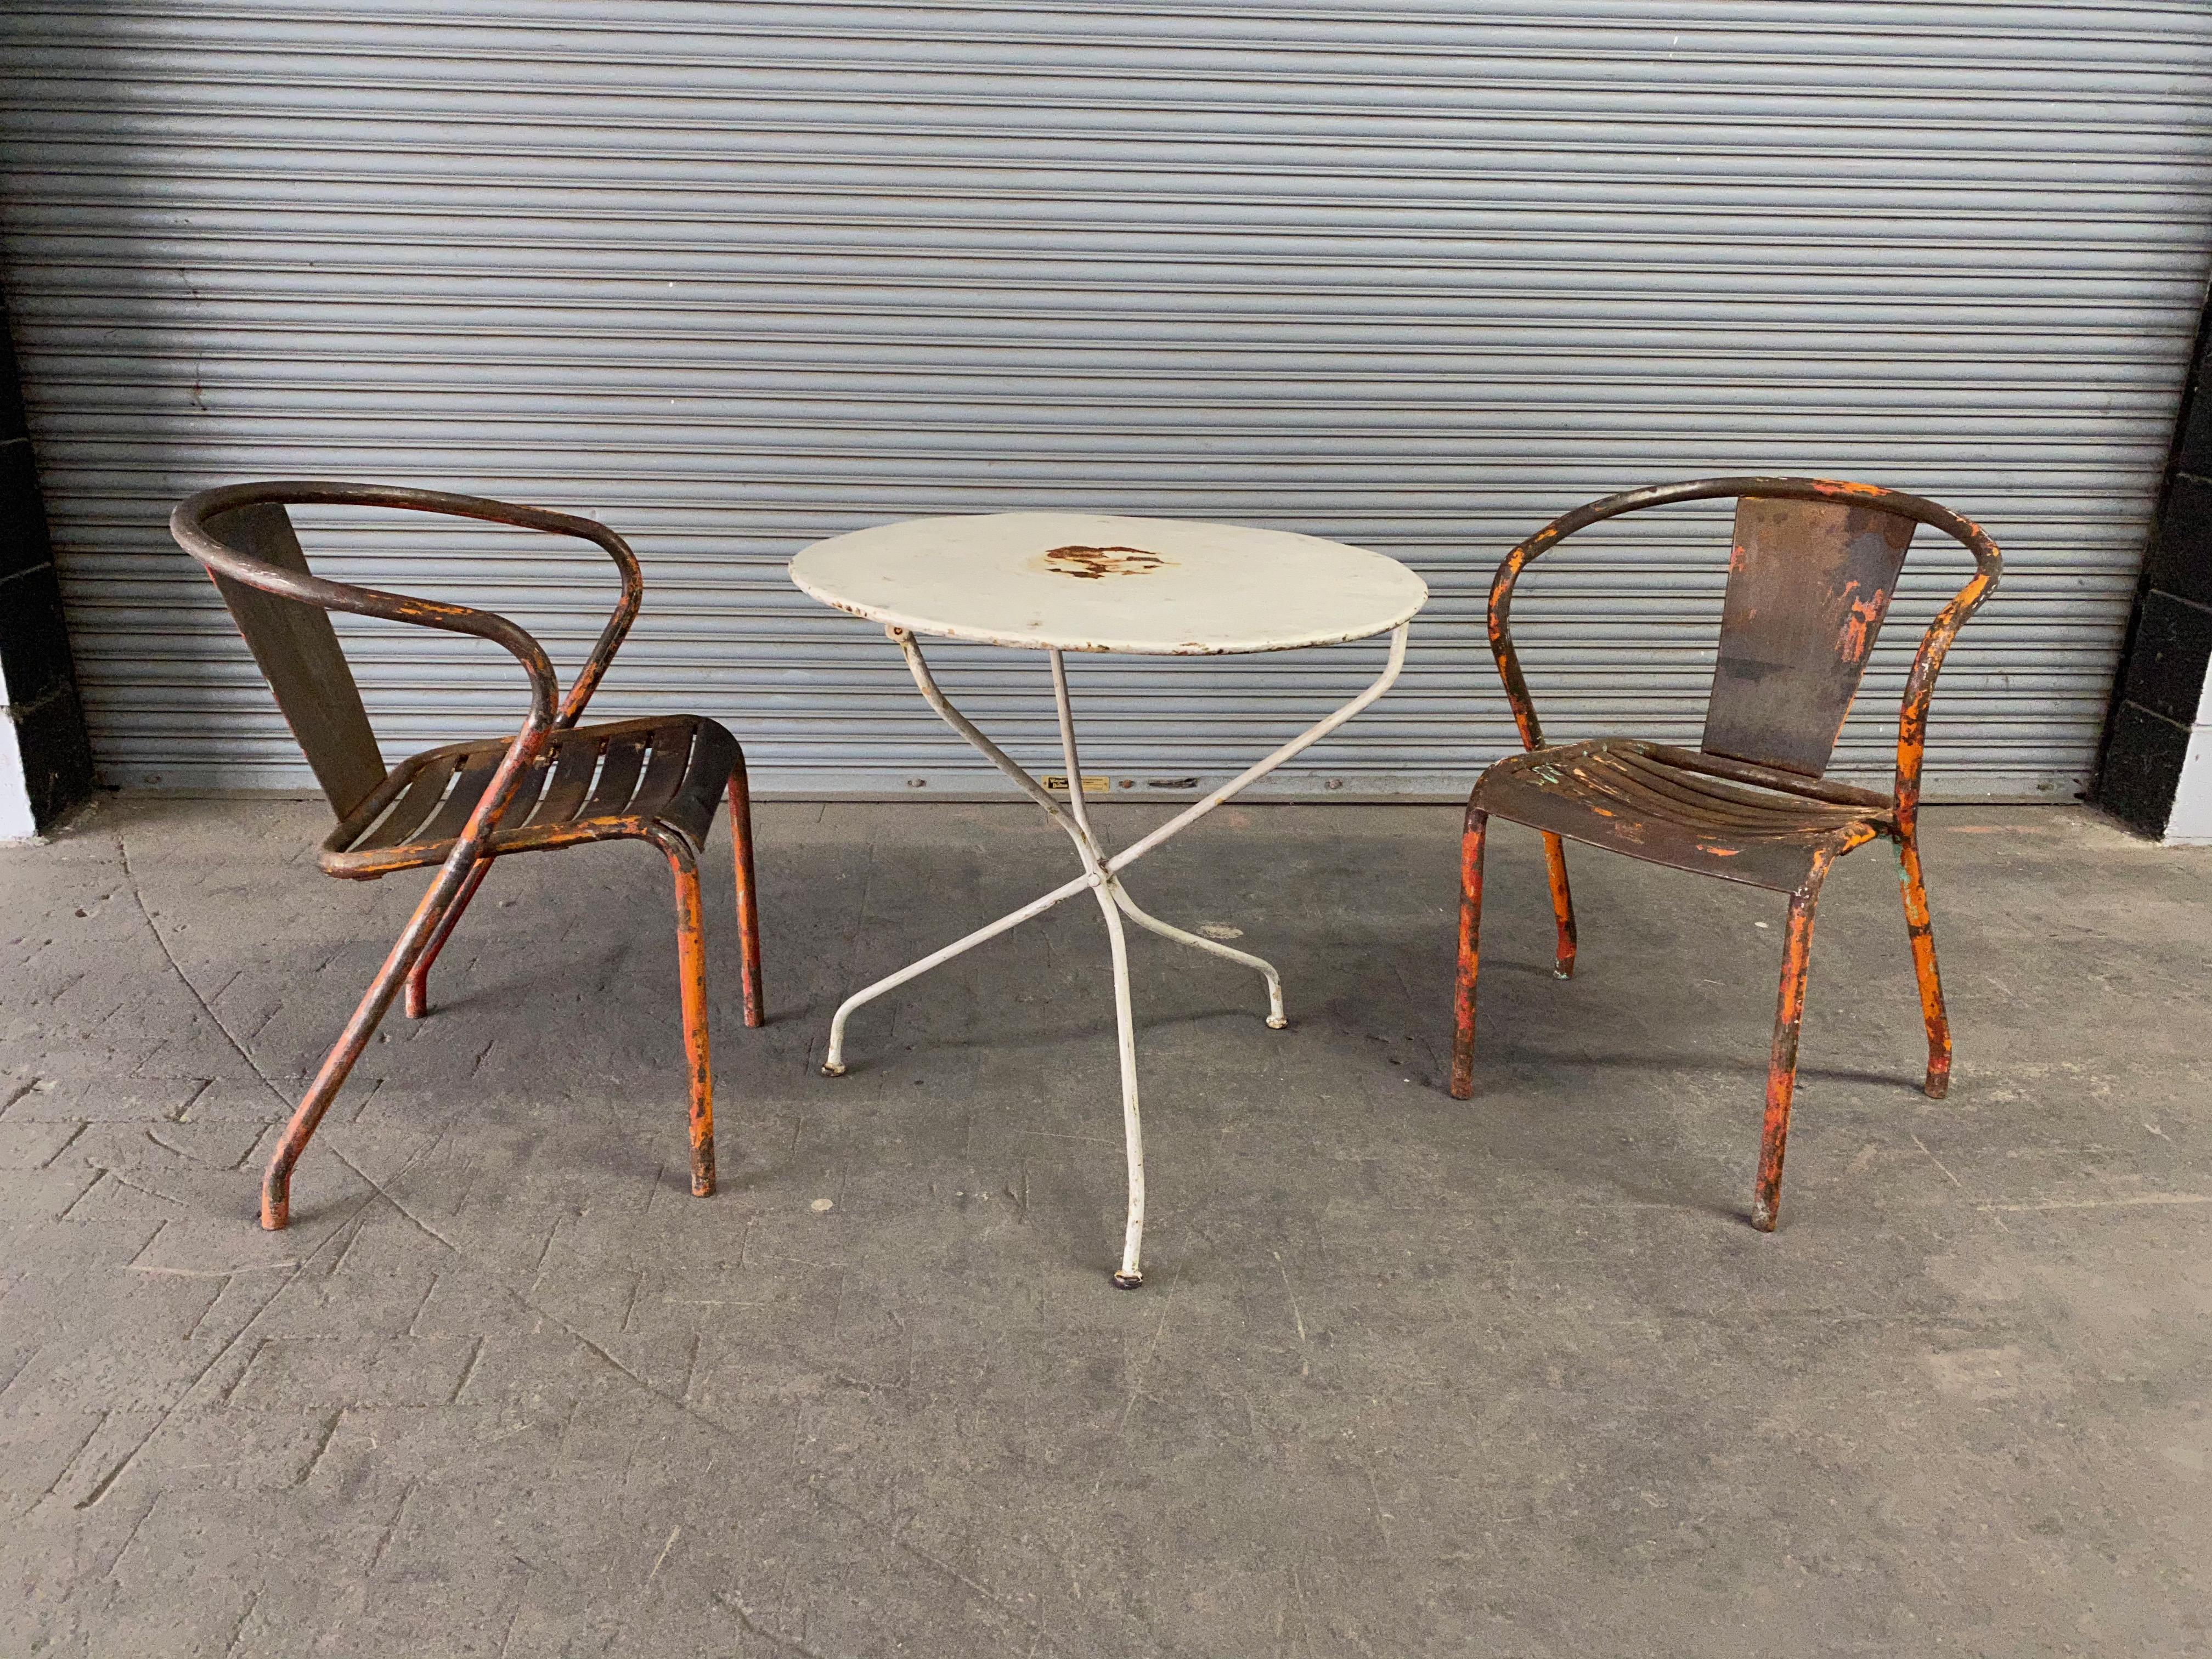 An exceptional pair of French 1920s industrial metal Tolix armchairs with worn and distressed orange paint. Typical of the garden and bistro furniture in the South of France, these charming chairs are the perfect blend of the industrial chicness of